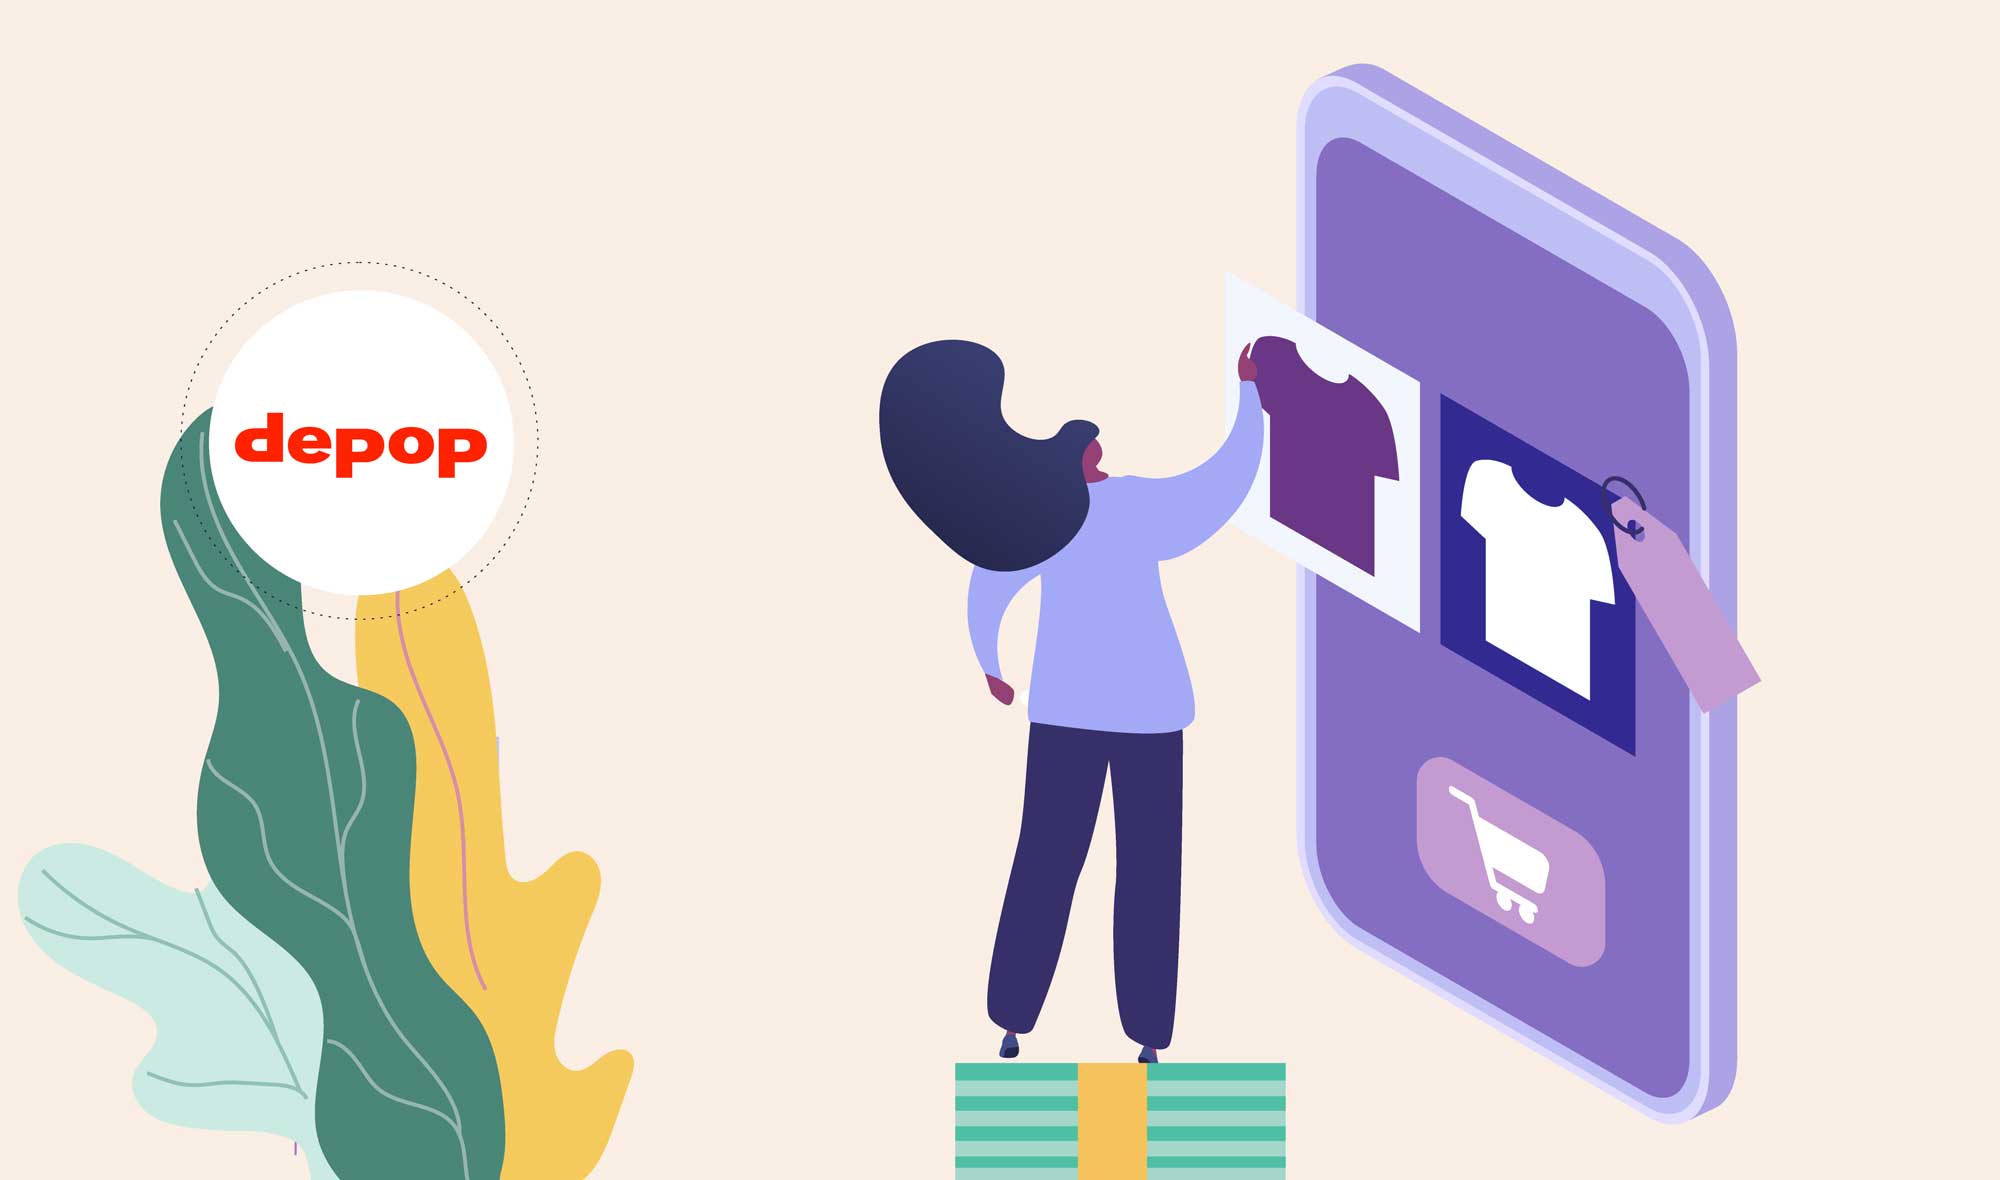 10 Steps to Increase Your Sales on Depop